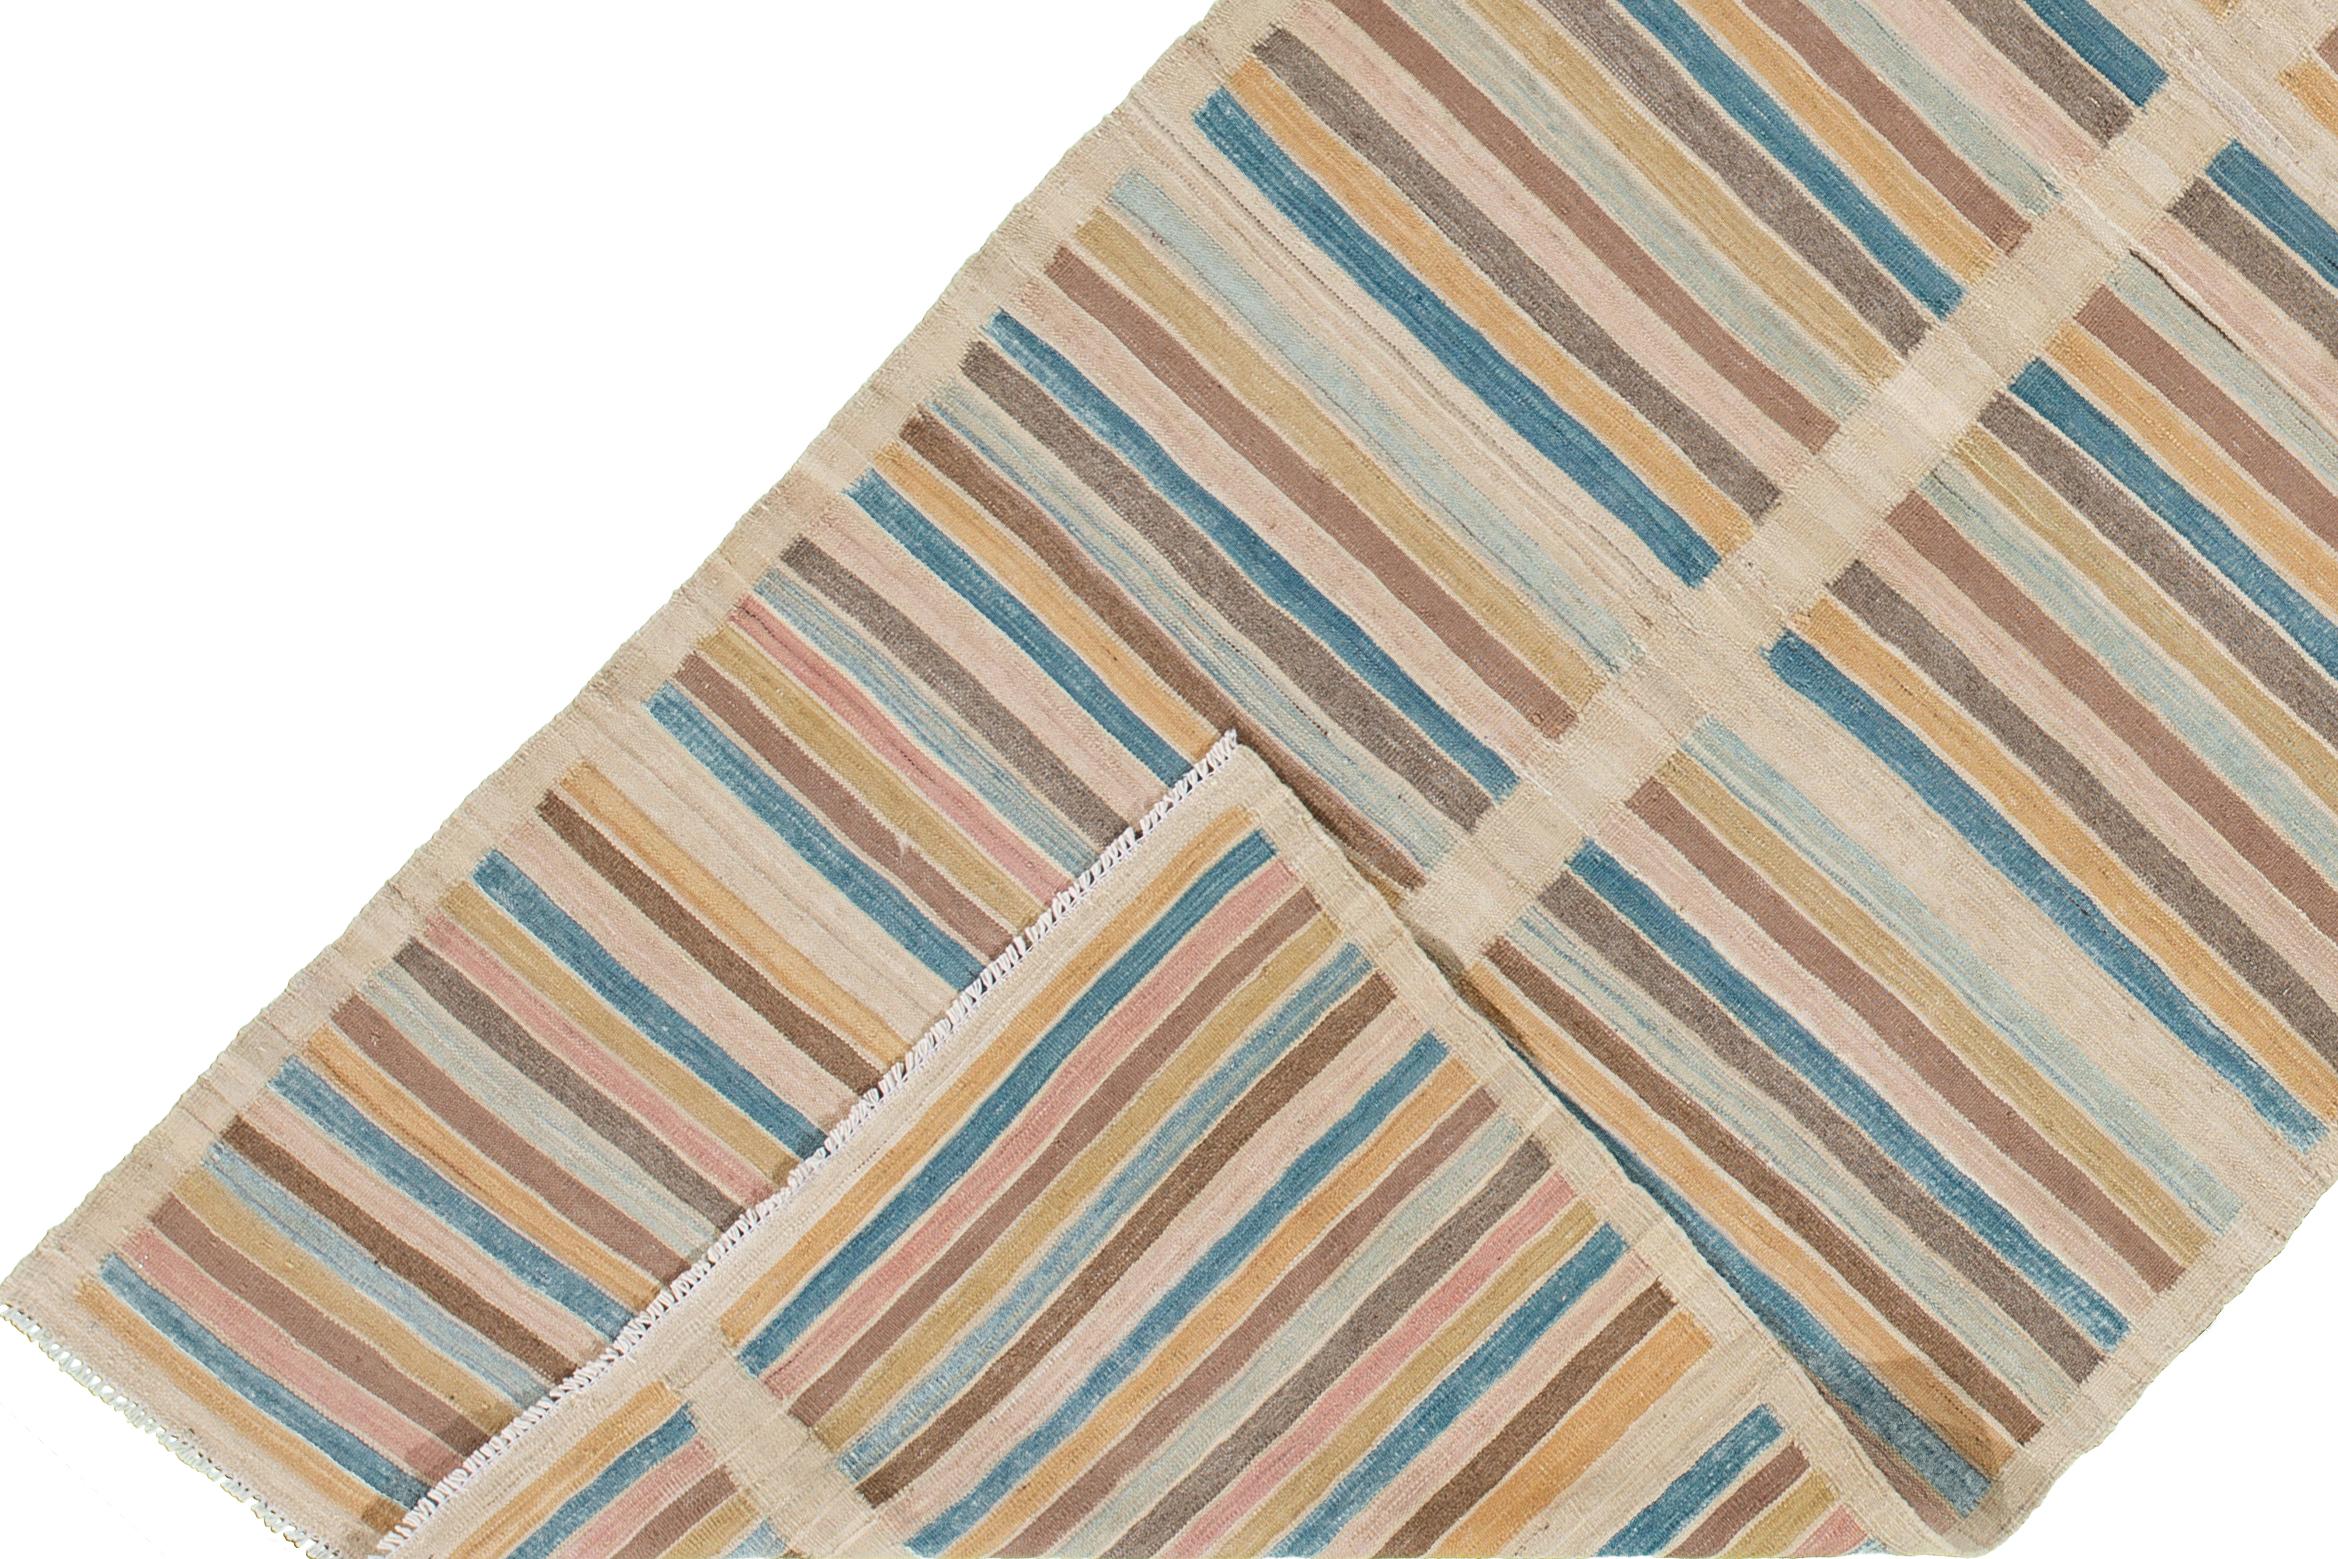 A hand-knotted modern Kilim rug with a linear pattern design. This rug measures 3'6